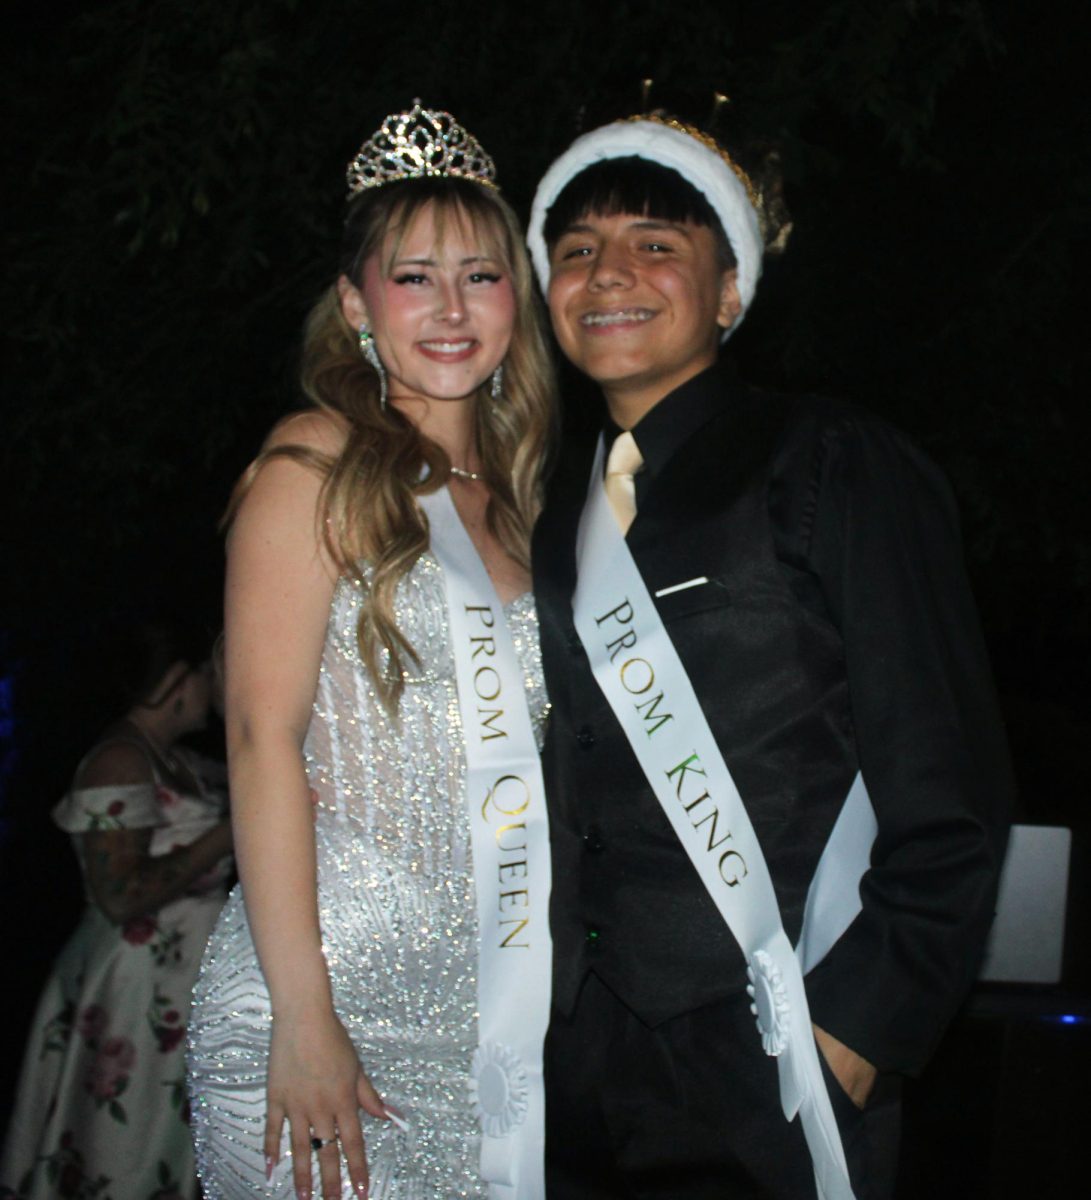 Prom Queen Mackenzie Self and Prom King Felipe Carrazco accept their titles.